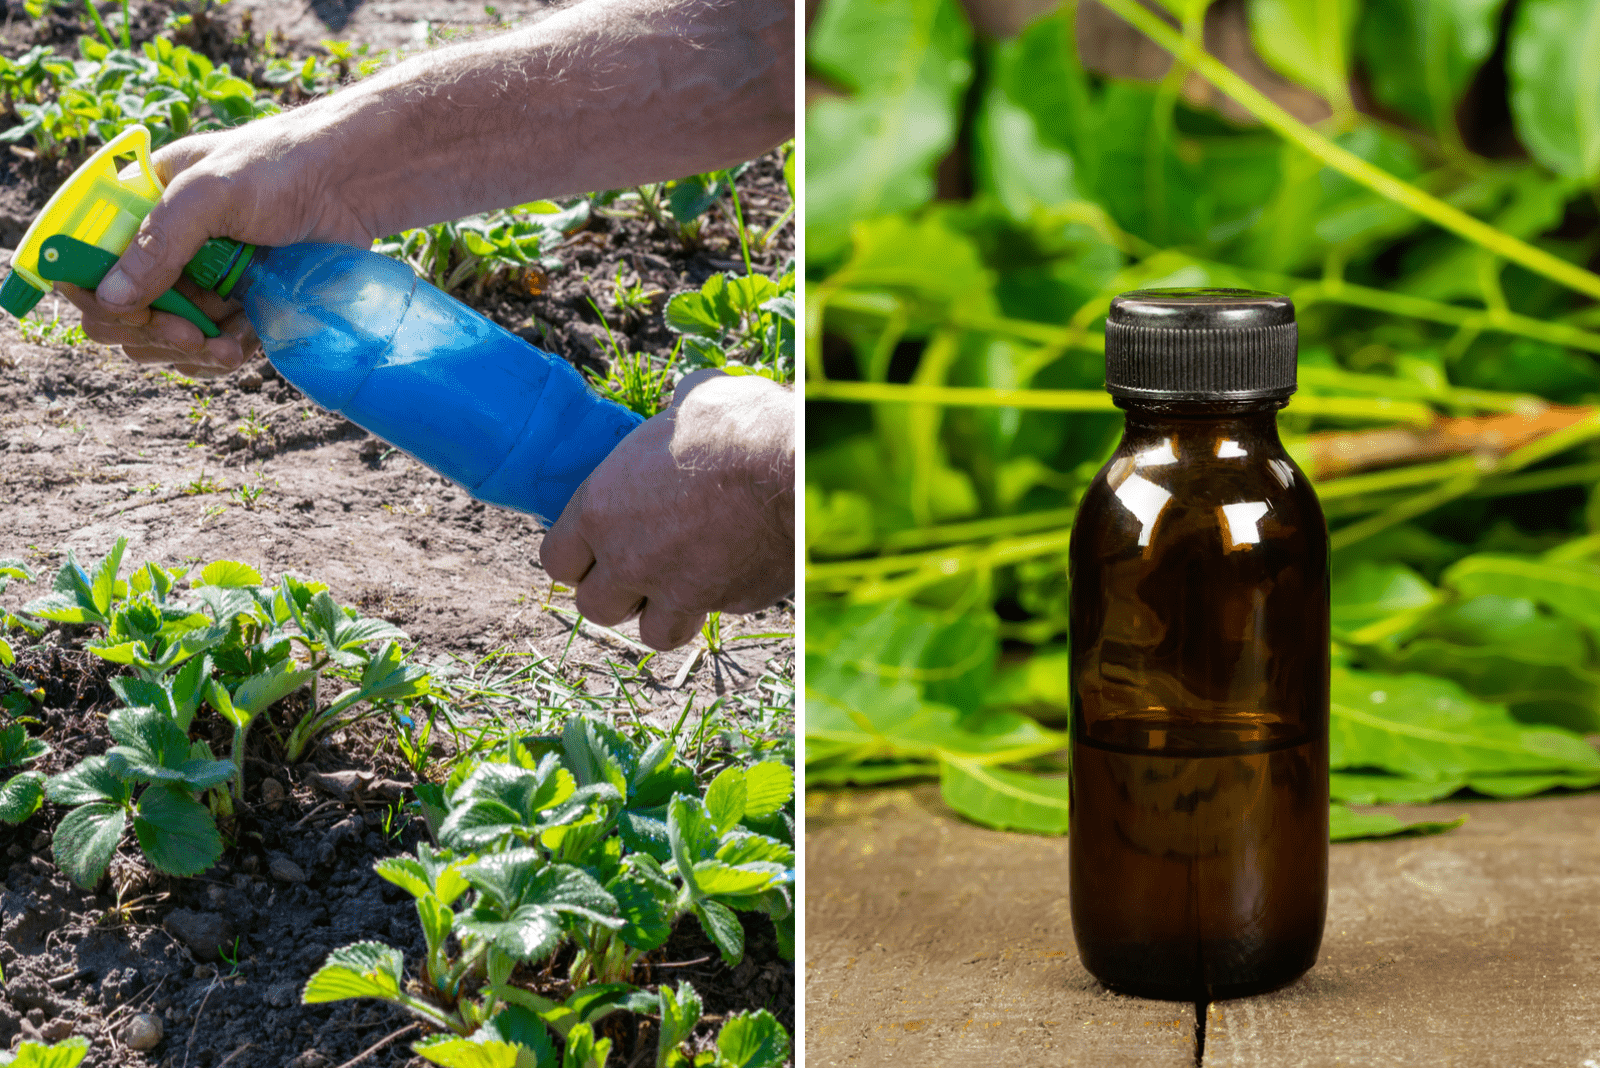 Copper Fungicide Vs Neem Oil: What’s The Better Option?